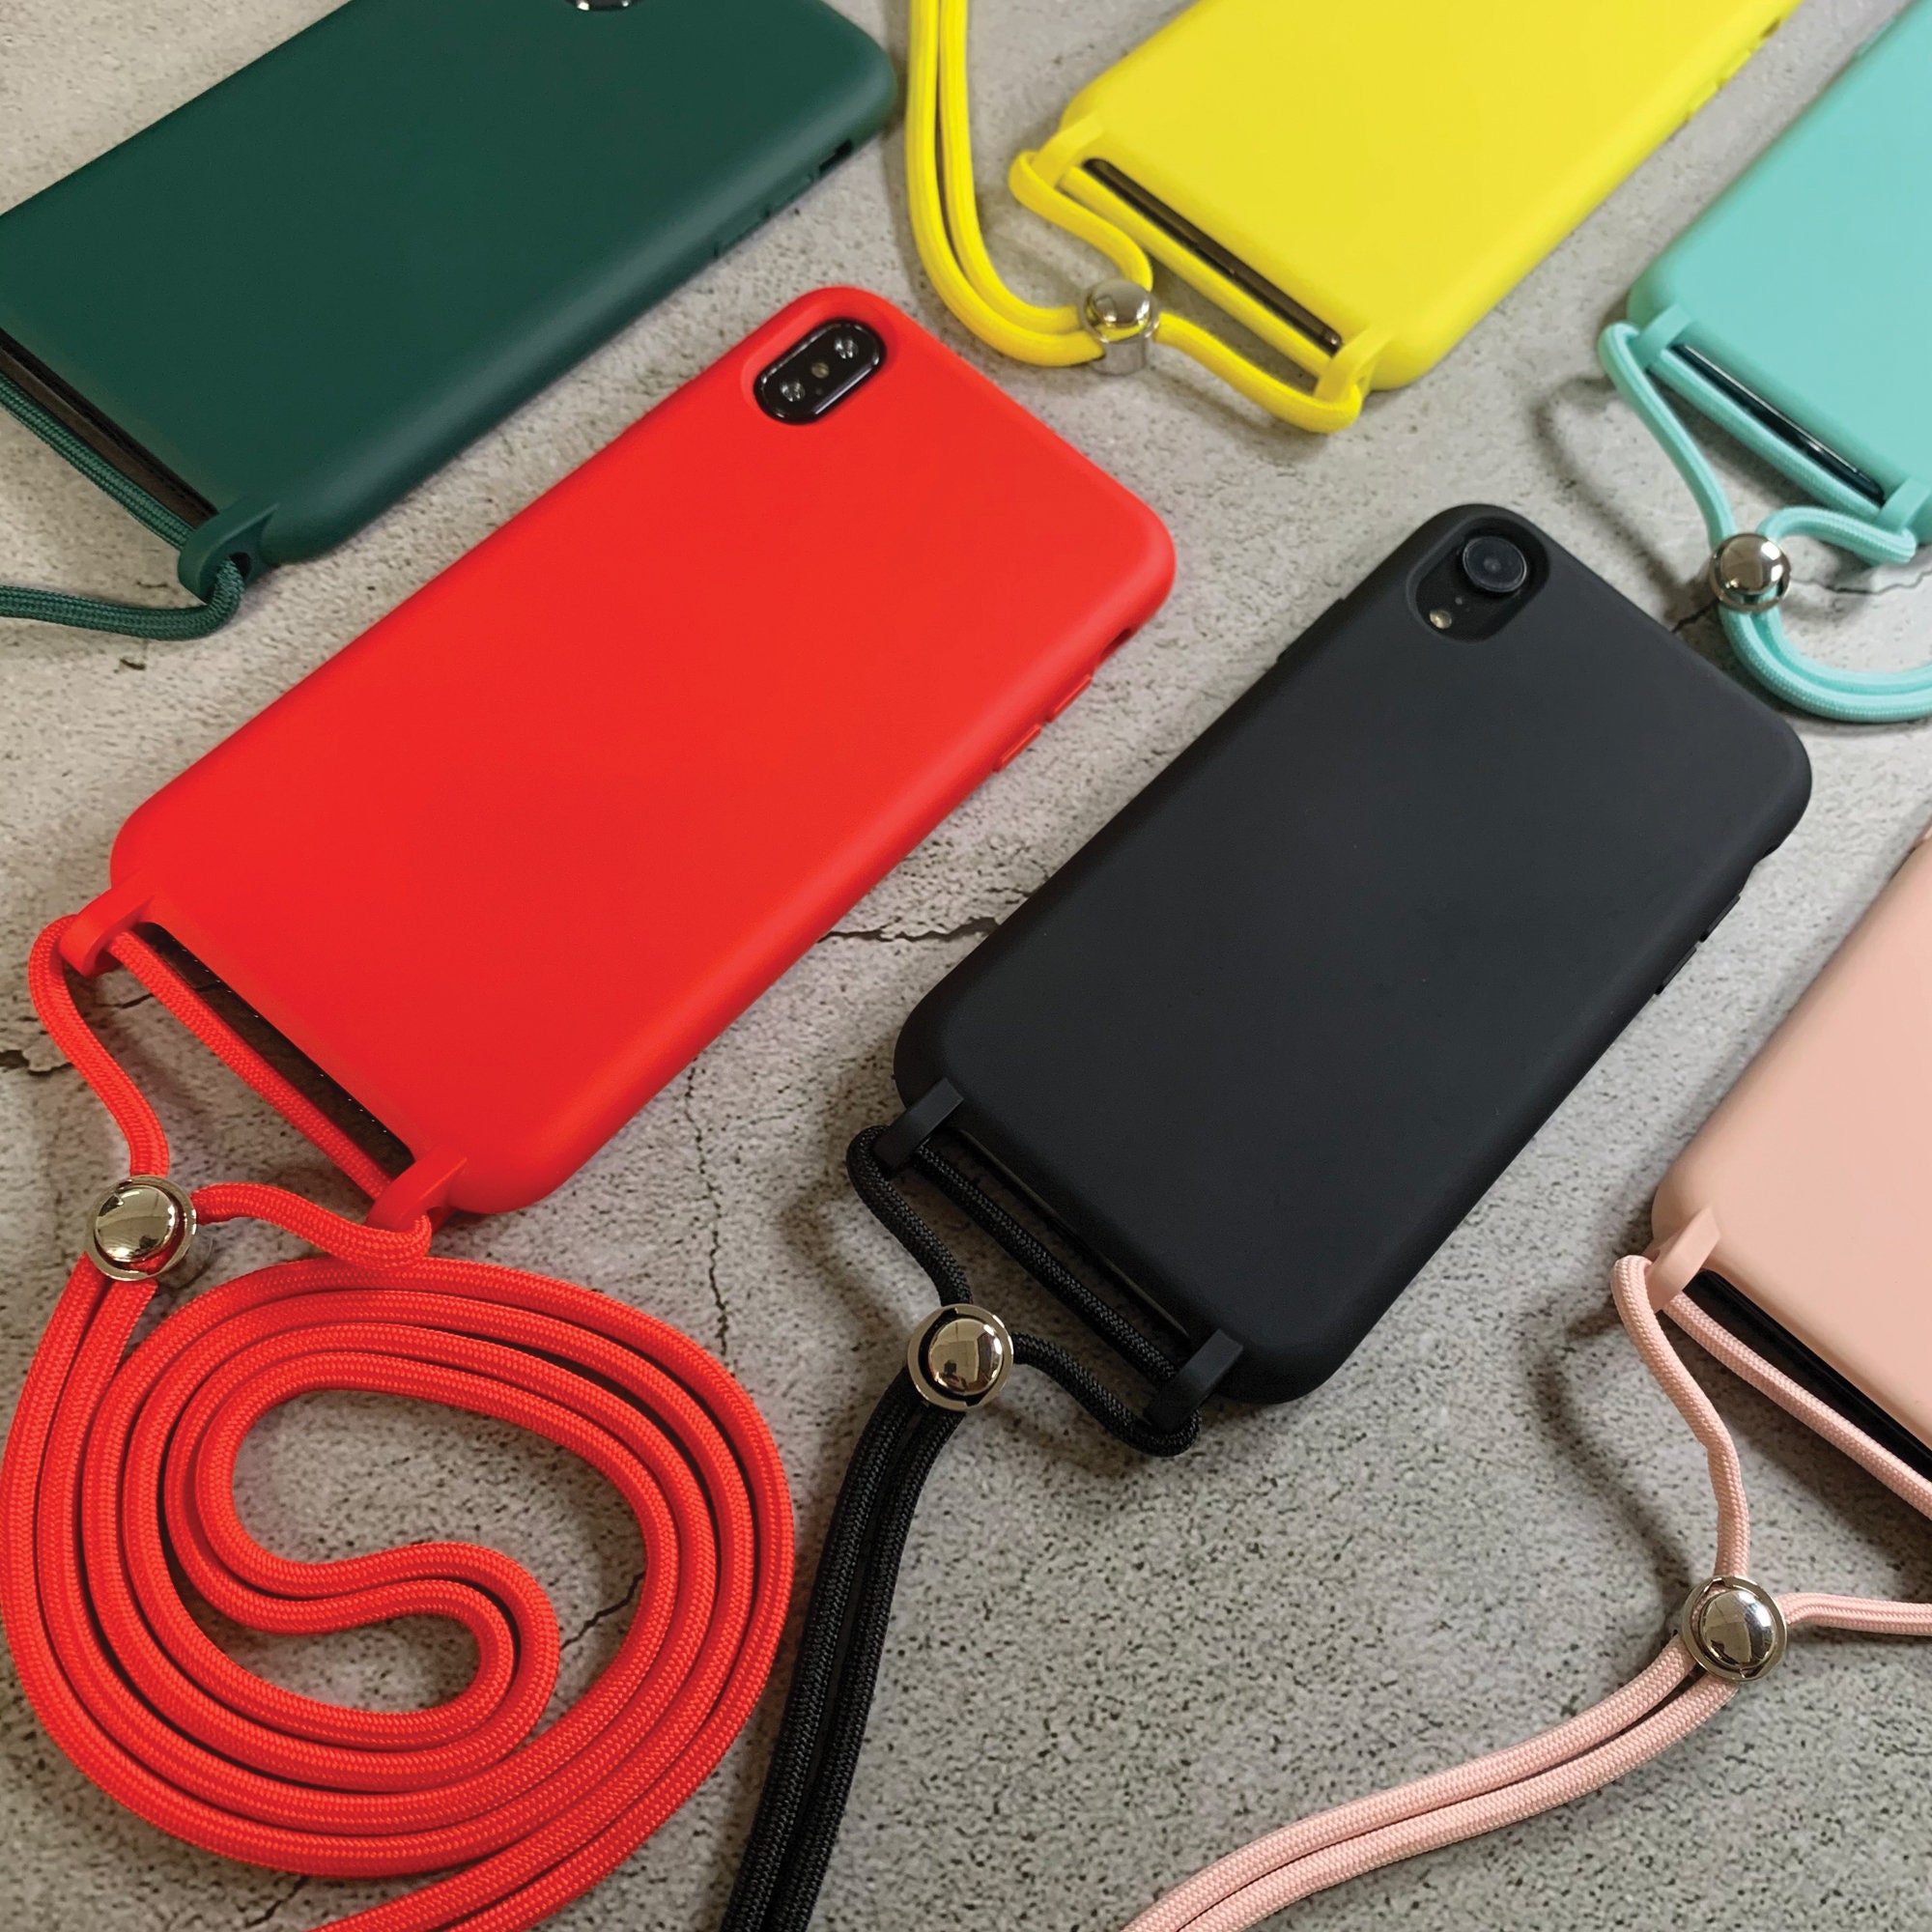 Case Cover With Rope for iPhone 6, 7, 8, X, Xs, XR, XS Max, 11, 11 Pro, 11  Pro Max, 12, 12 Pro, 12 Pro Max, 13, 13 Mini, 13 Pro, 13 Pro Max - Etsy